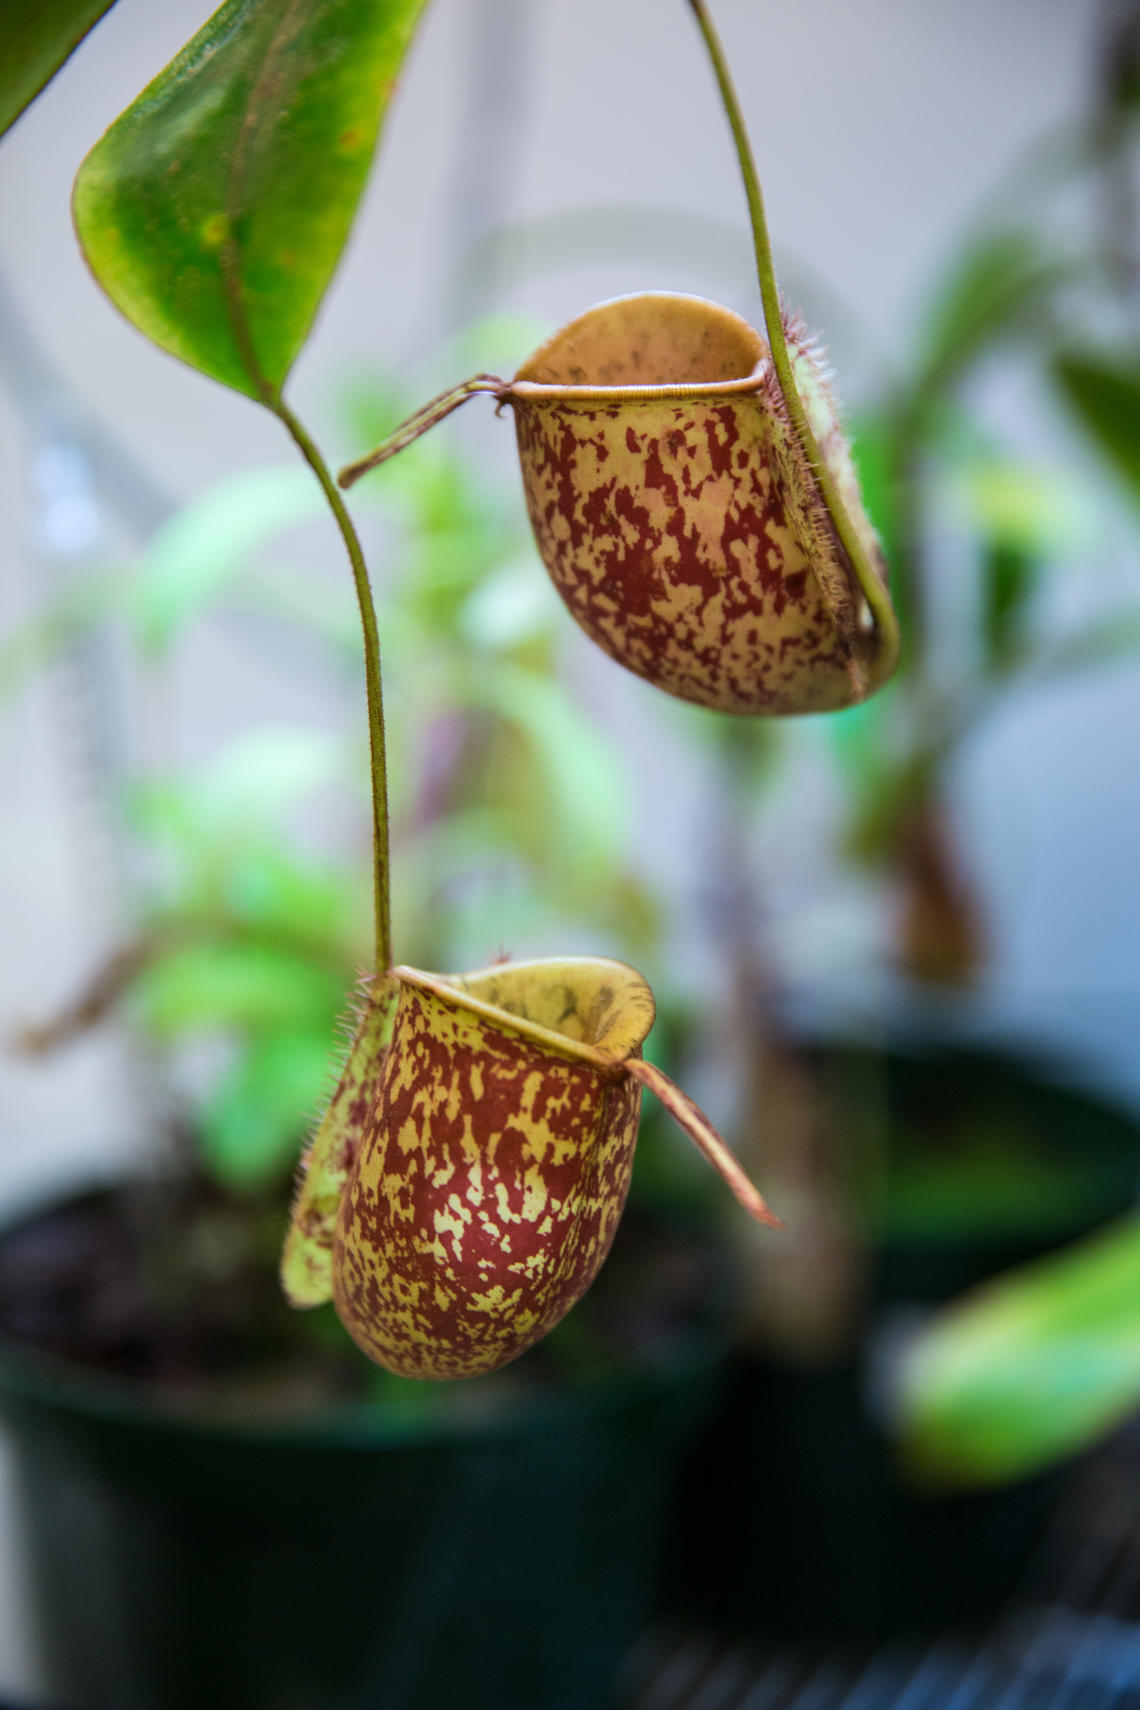 David Schriemer is studying whether the enzyme blend in a species of tropical pitcher plant could be developed into a pharmaceutical product to help people with gluten intolerance. 